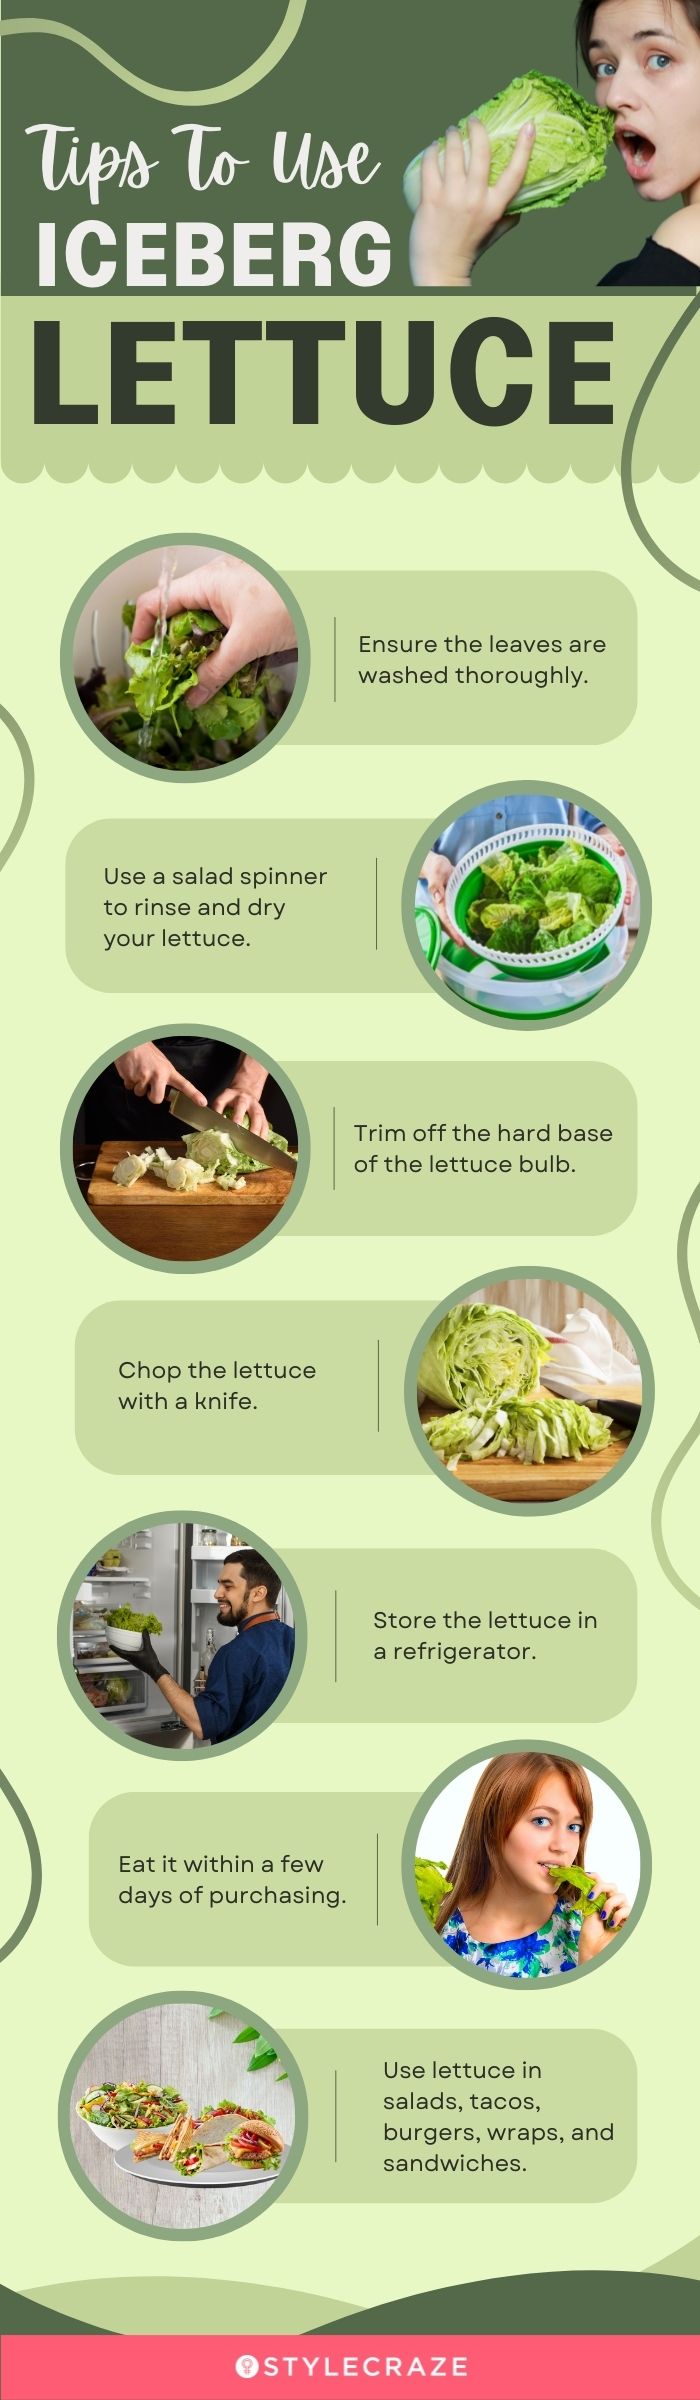 tips to use iceberg lettuce (infographic)